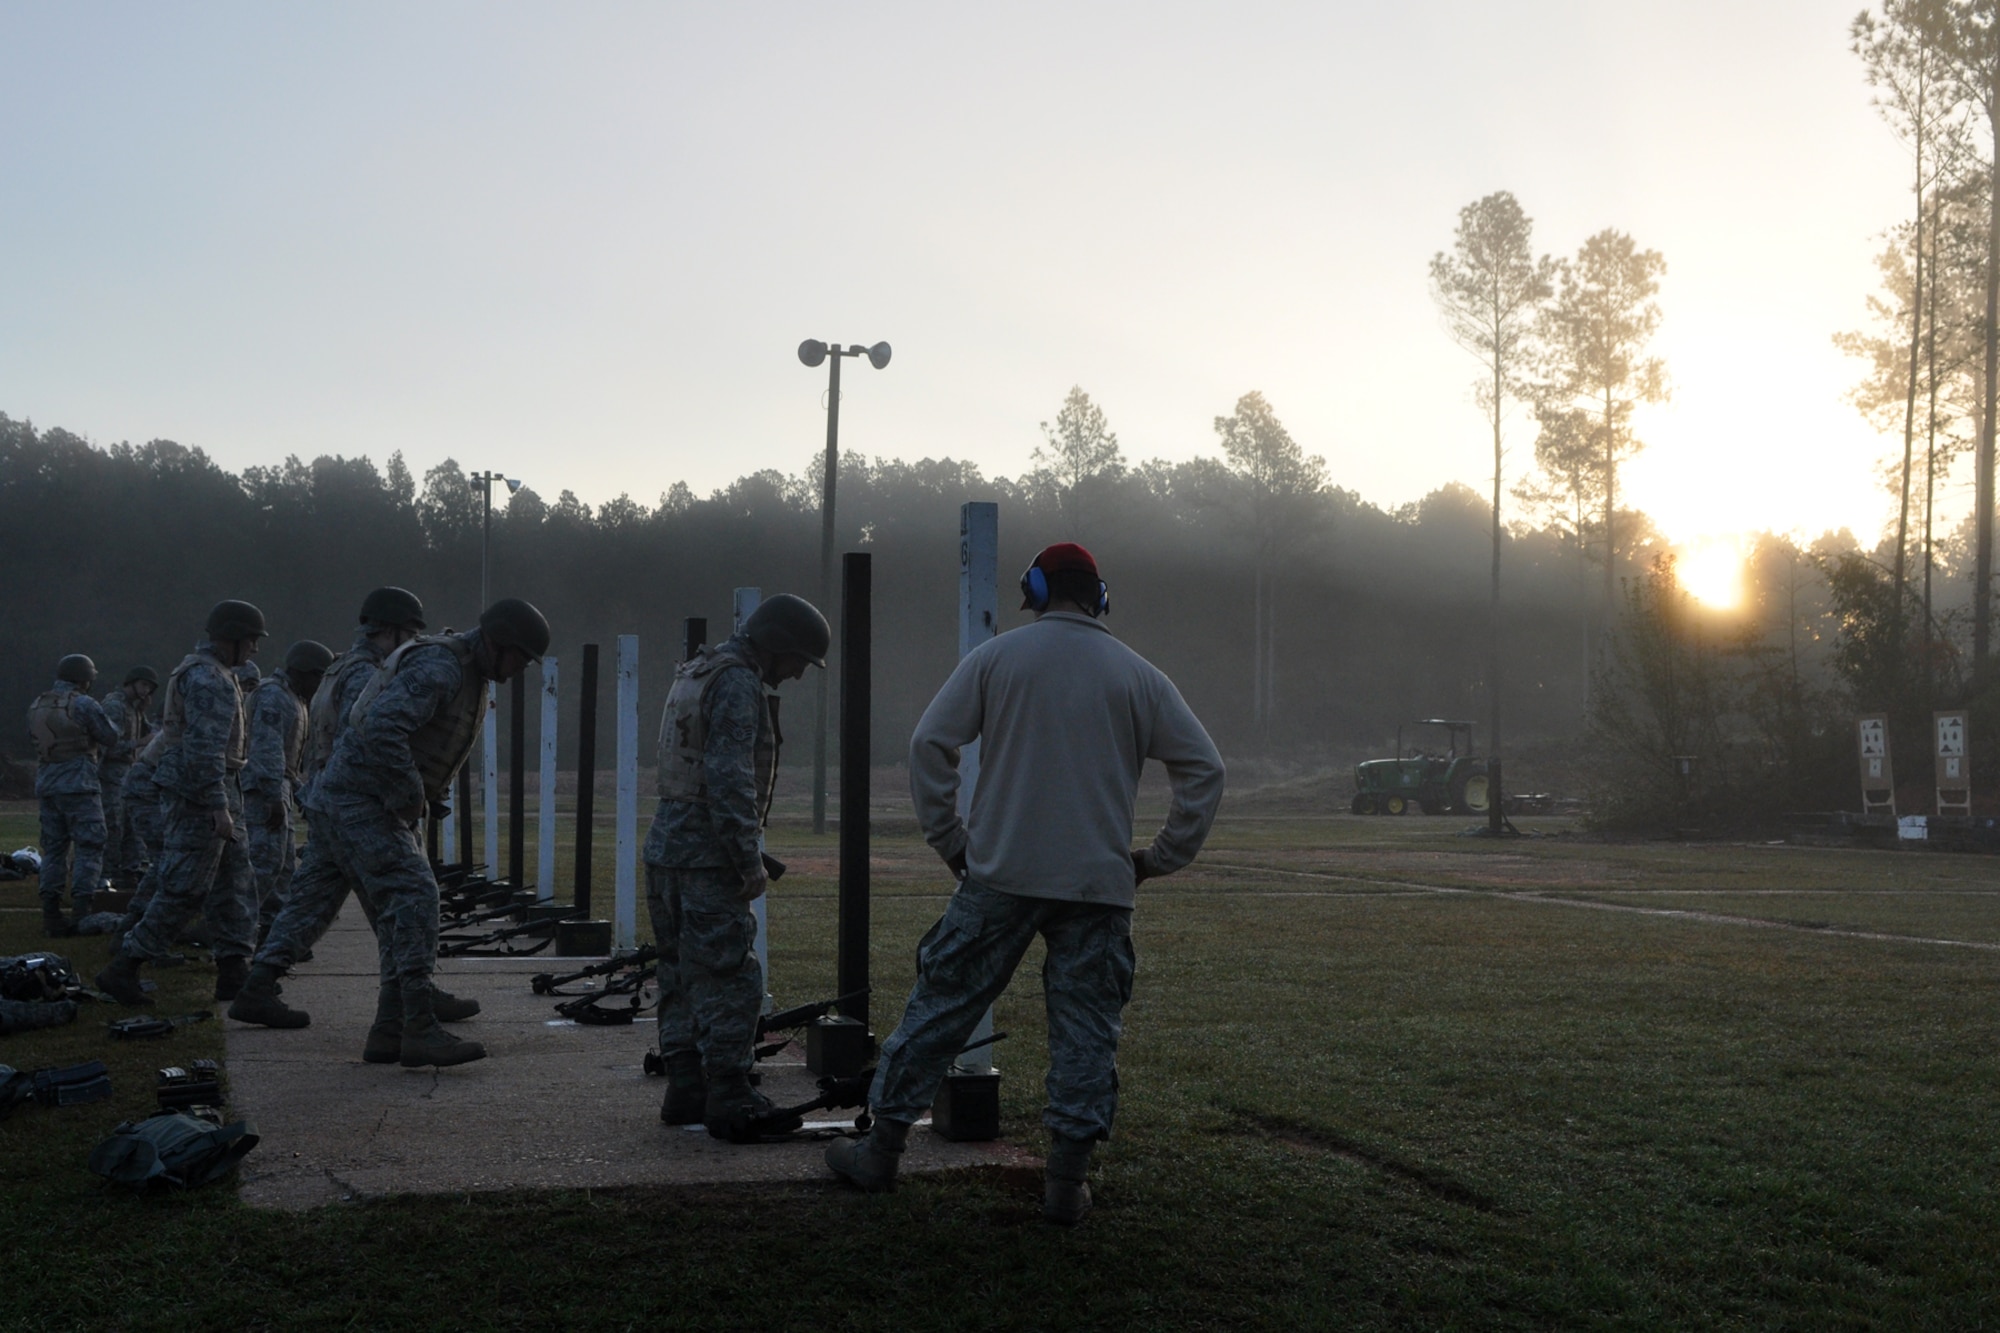 Airmen from the 307th Civil Engineer Squadron beat the Sun to the firing line at a range near Barksdale Air Force Base, La., Nov. 3, 2012. (U.S. Air Force photo by Master Sgt. Jeff Walston/Released) 